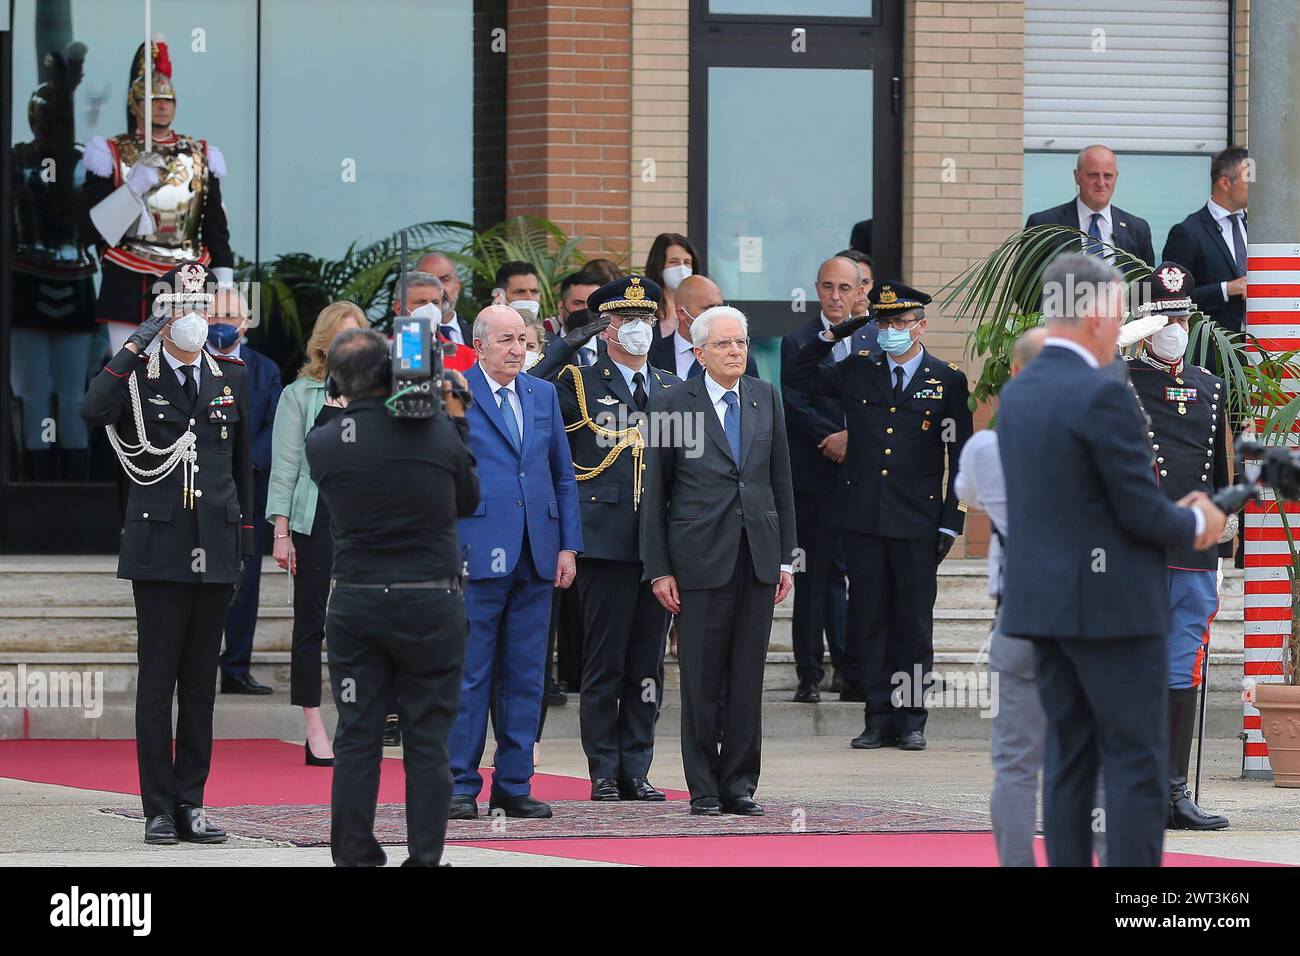 The president of Algeria, Abdelmadjid Tebboune (left), departing from Naples, arrives at the Capodichino airport for the military honors, together wit Stock Photo